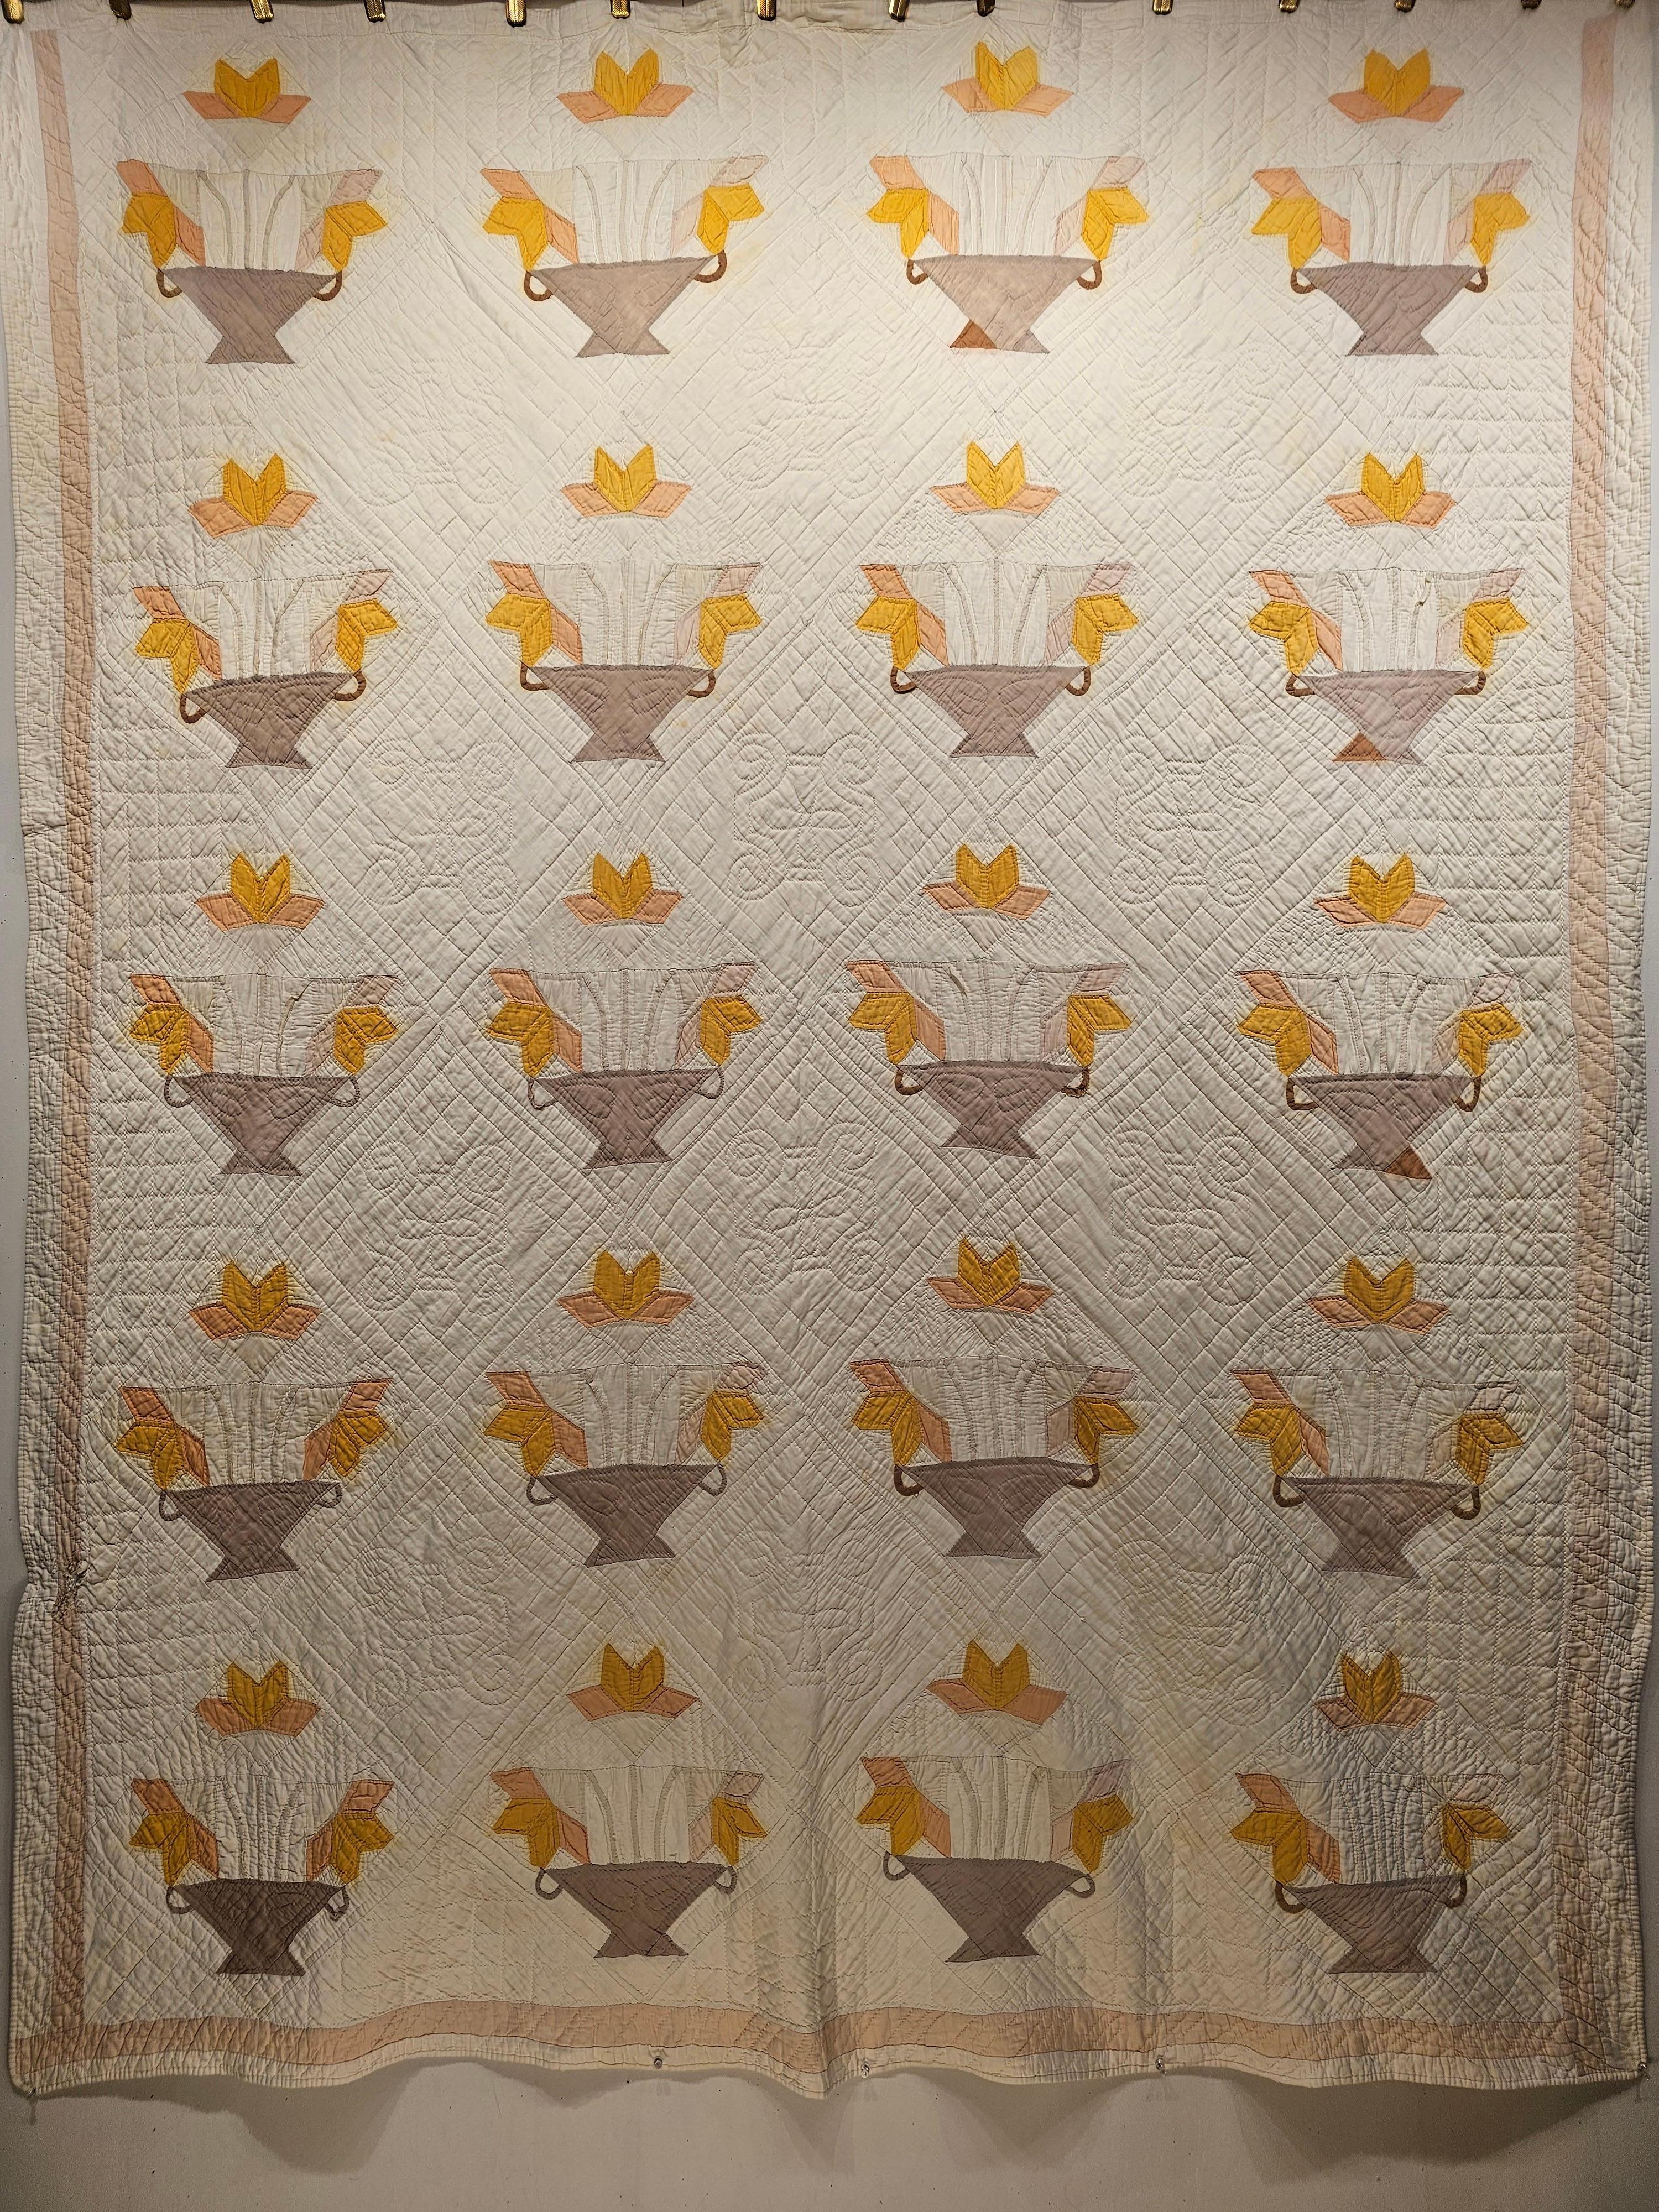 American Vintage Hand Stitched Applique Quilt in Basket Pattern in Ivory, Brown, Yellow For Sale